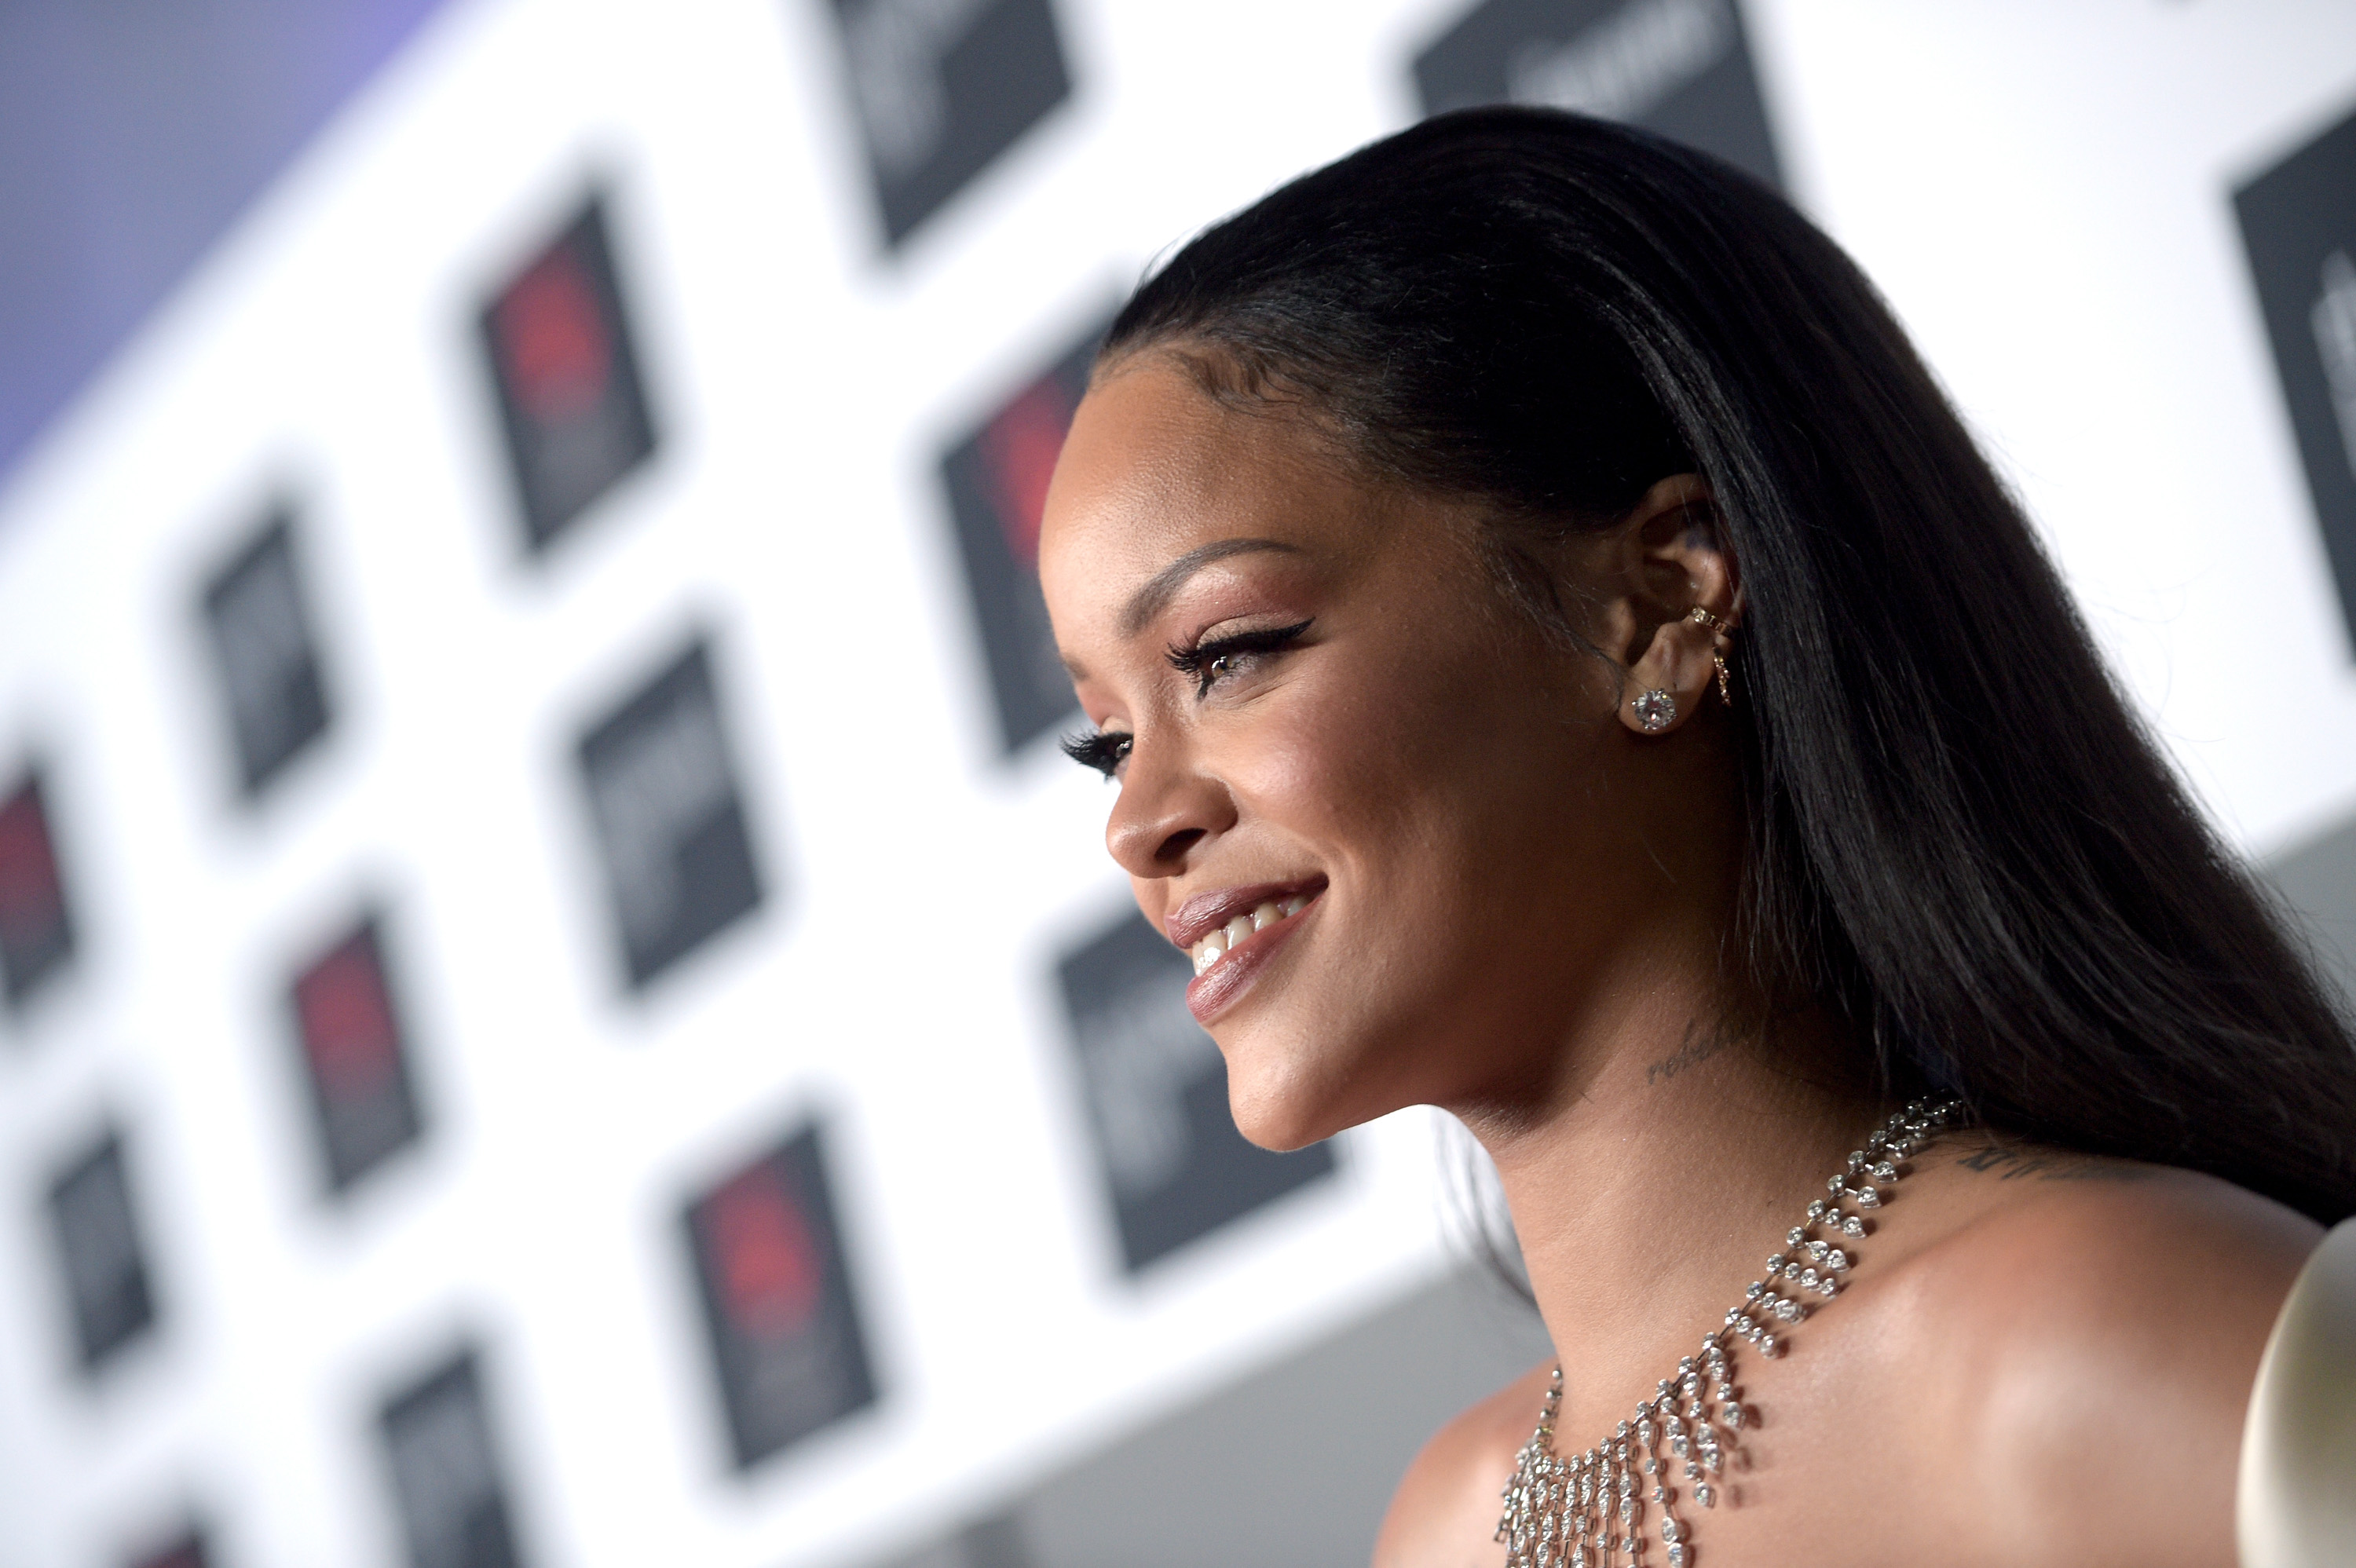 Rihanna attends the 2nd Annual Diamond Ball hosted by Rihanna and The Clara Lionel Foundation at The Barker Hanger on December 10, 2015 in Santa Monica, California.